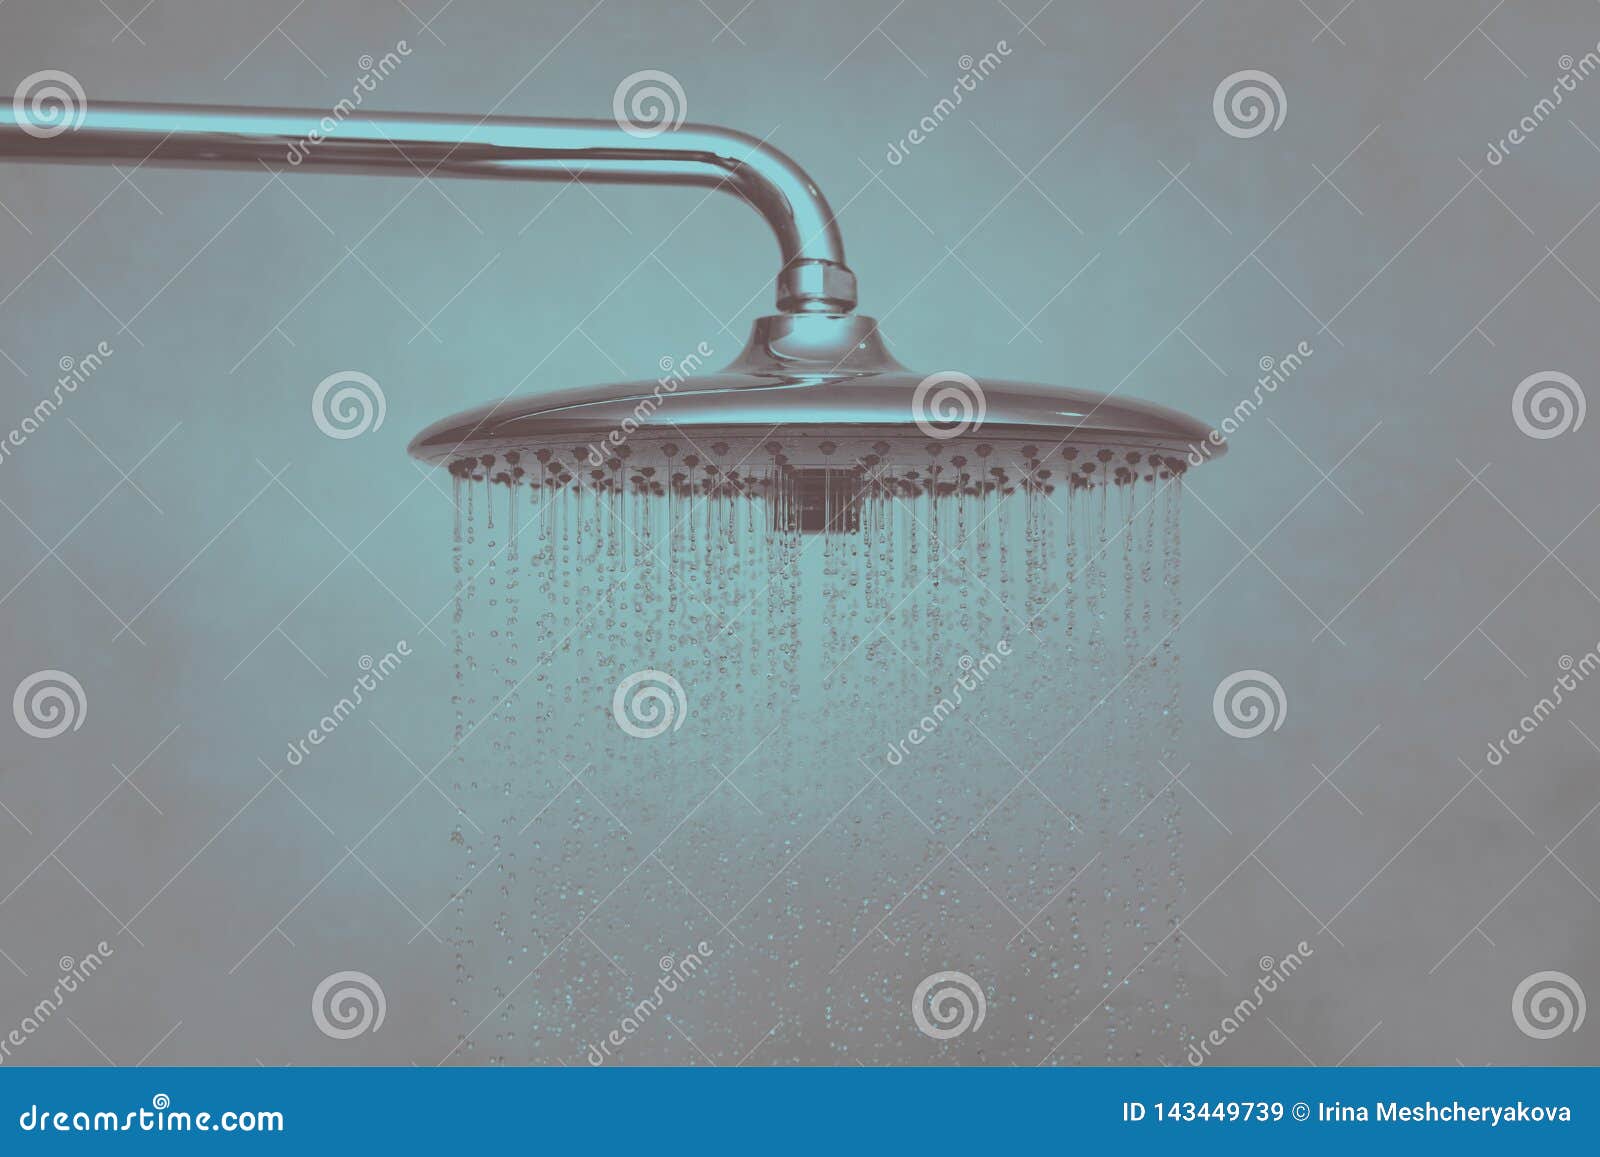 Water Running From Shower Head And Faucet In Modern Bathroom Rain